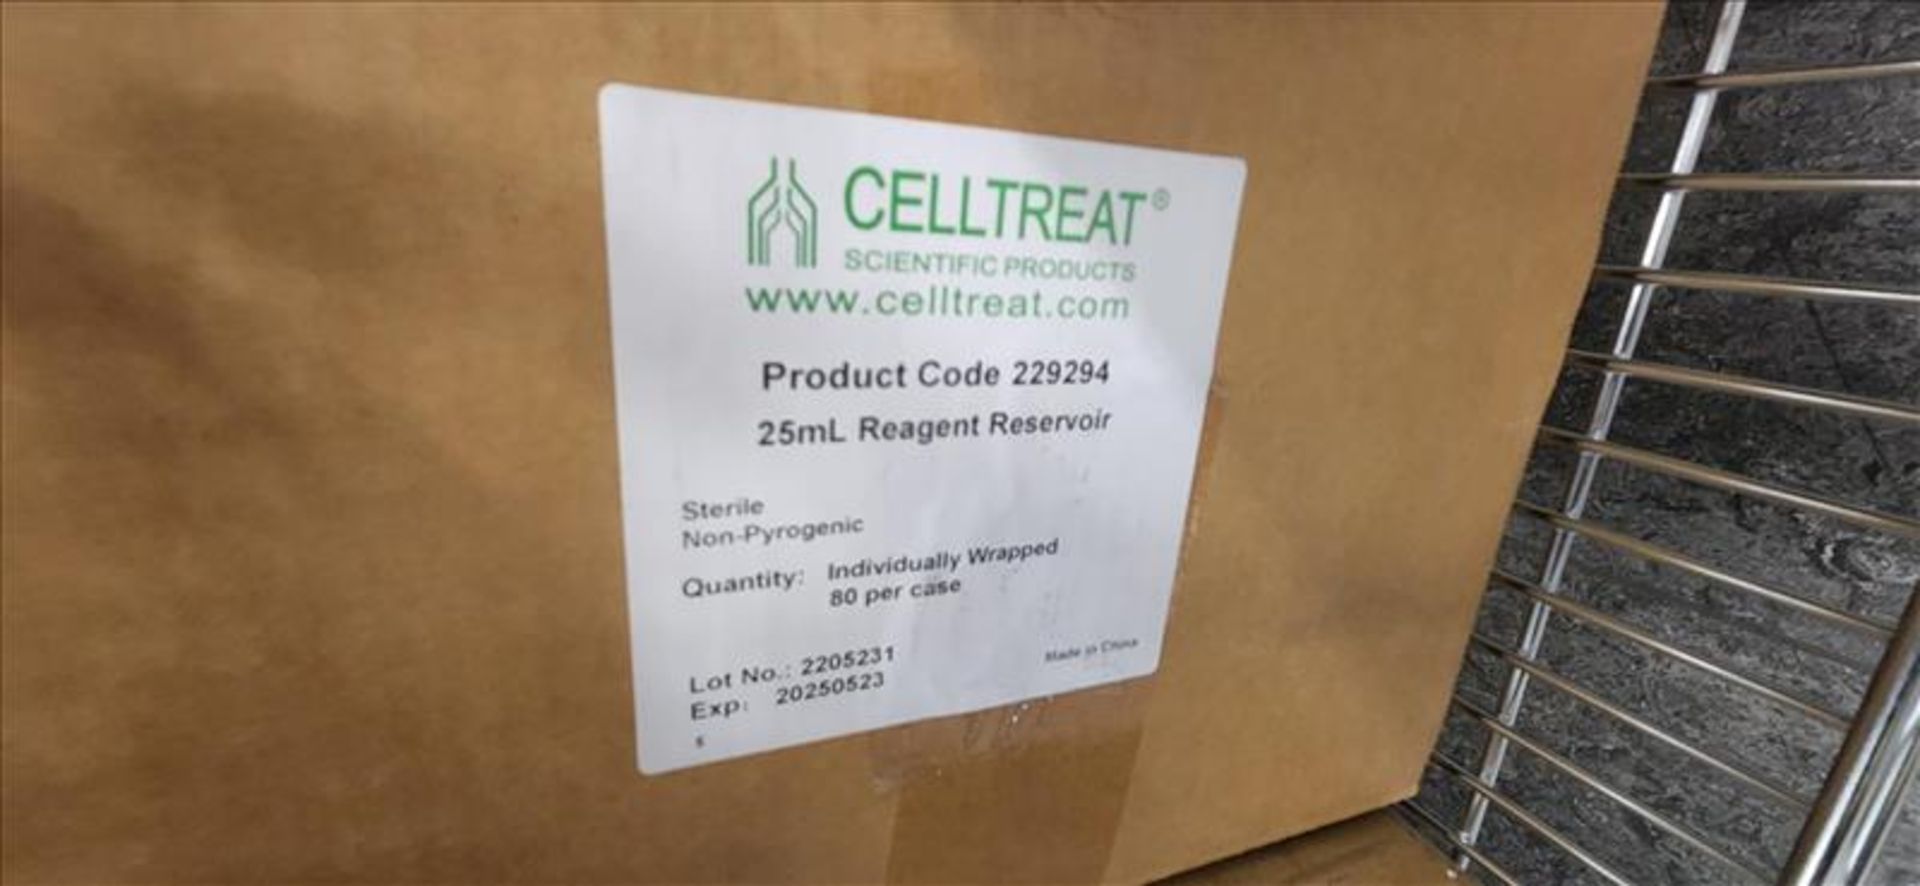 Lot of Celltreat Reagent Resevoir varying volumes - Image 2 of 2